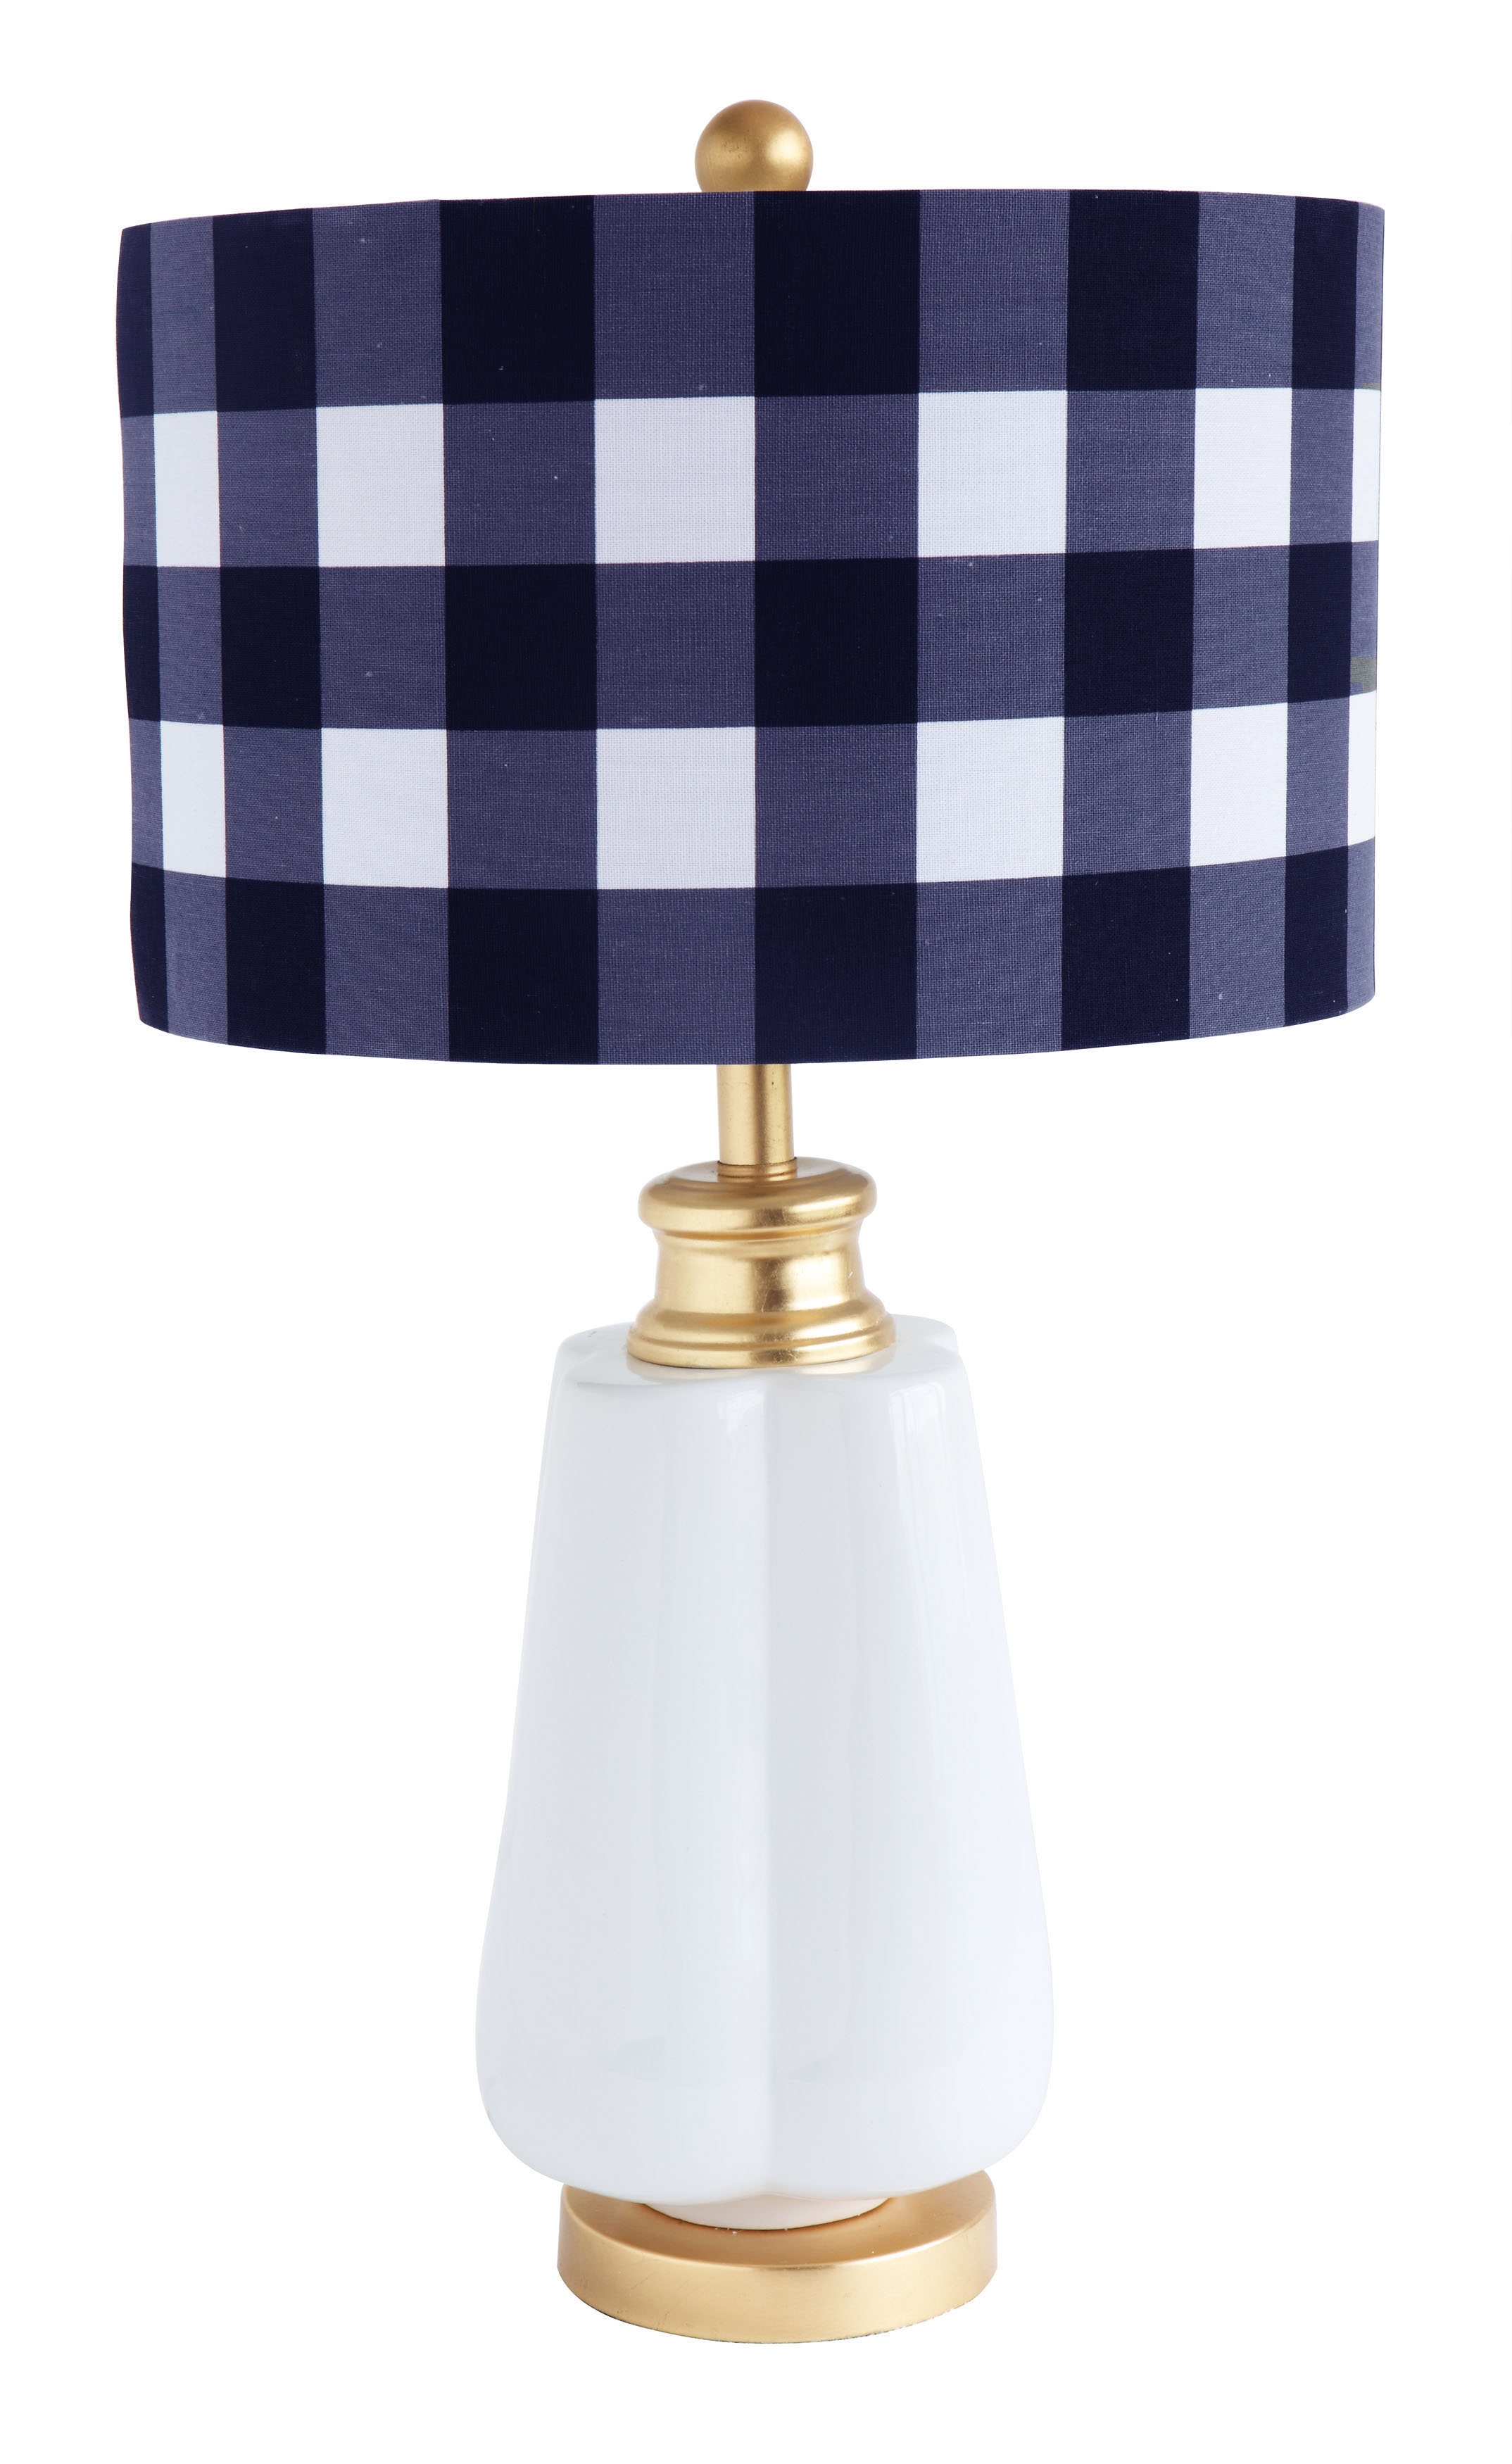 Ceramic Table Lamp with Gold Accents & Blue/White Gingham Linen Shade - Image 0